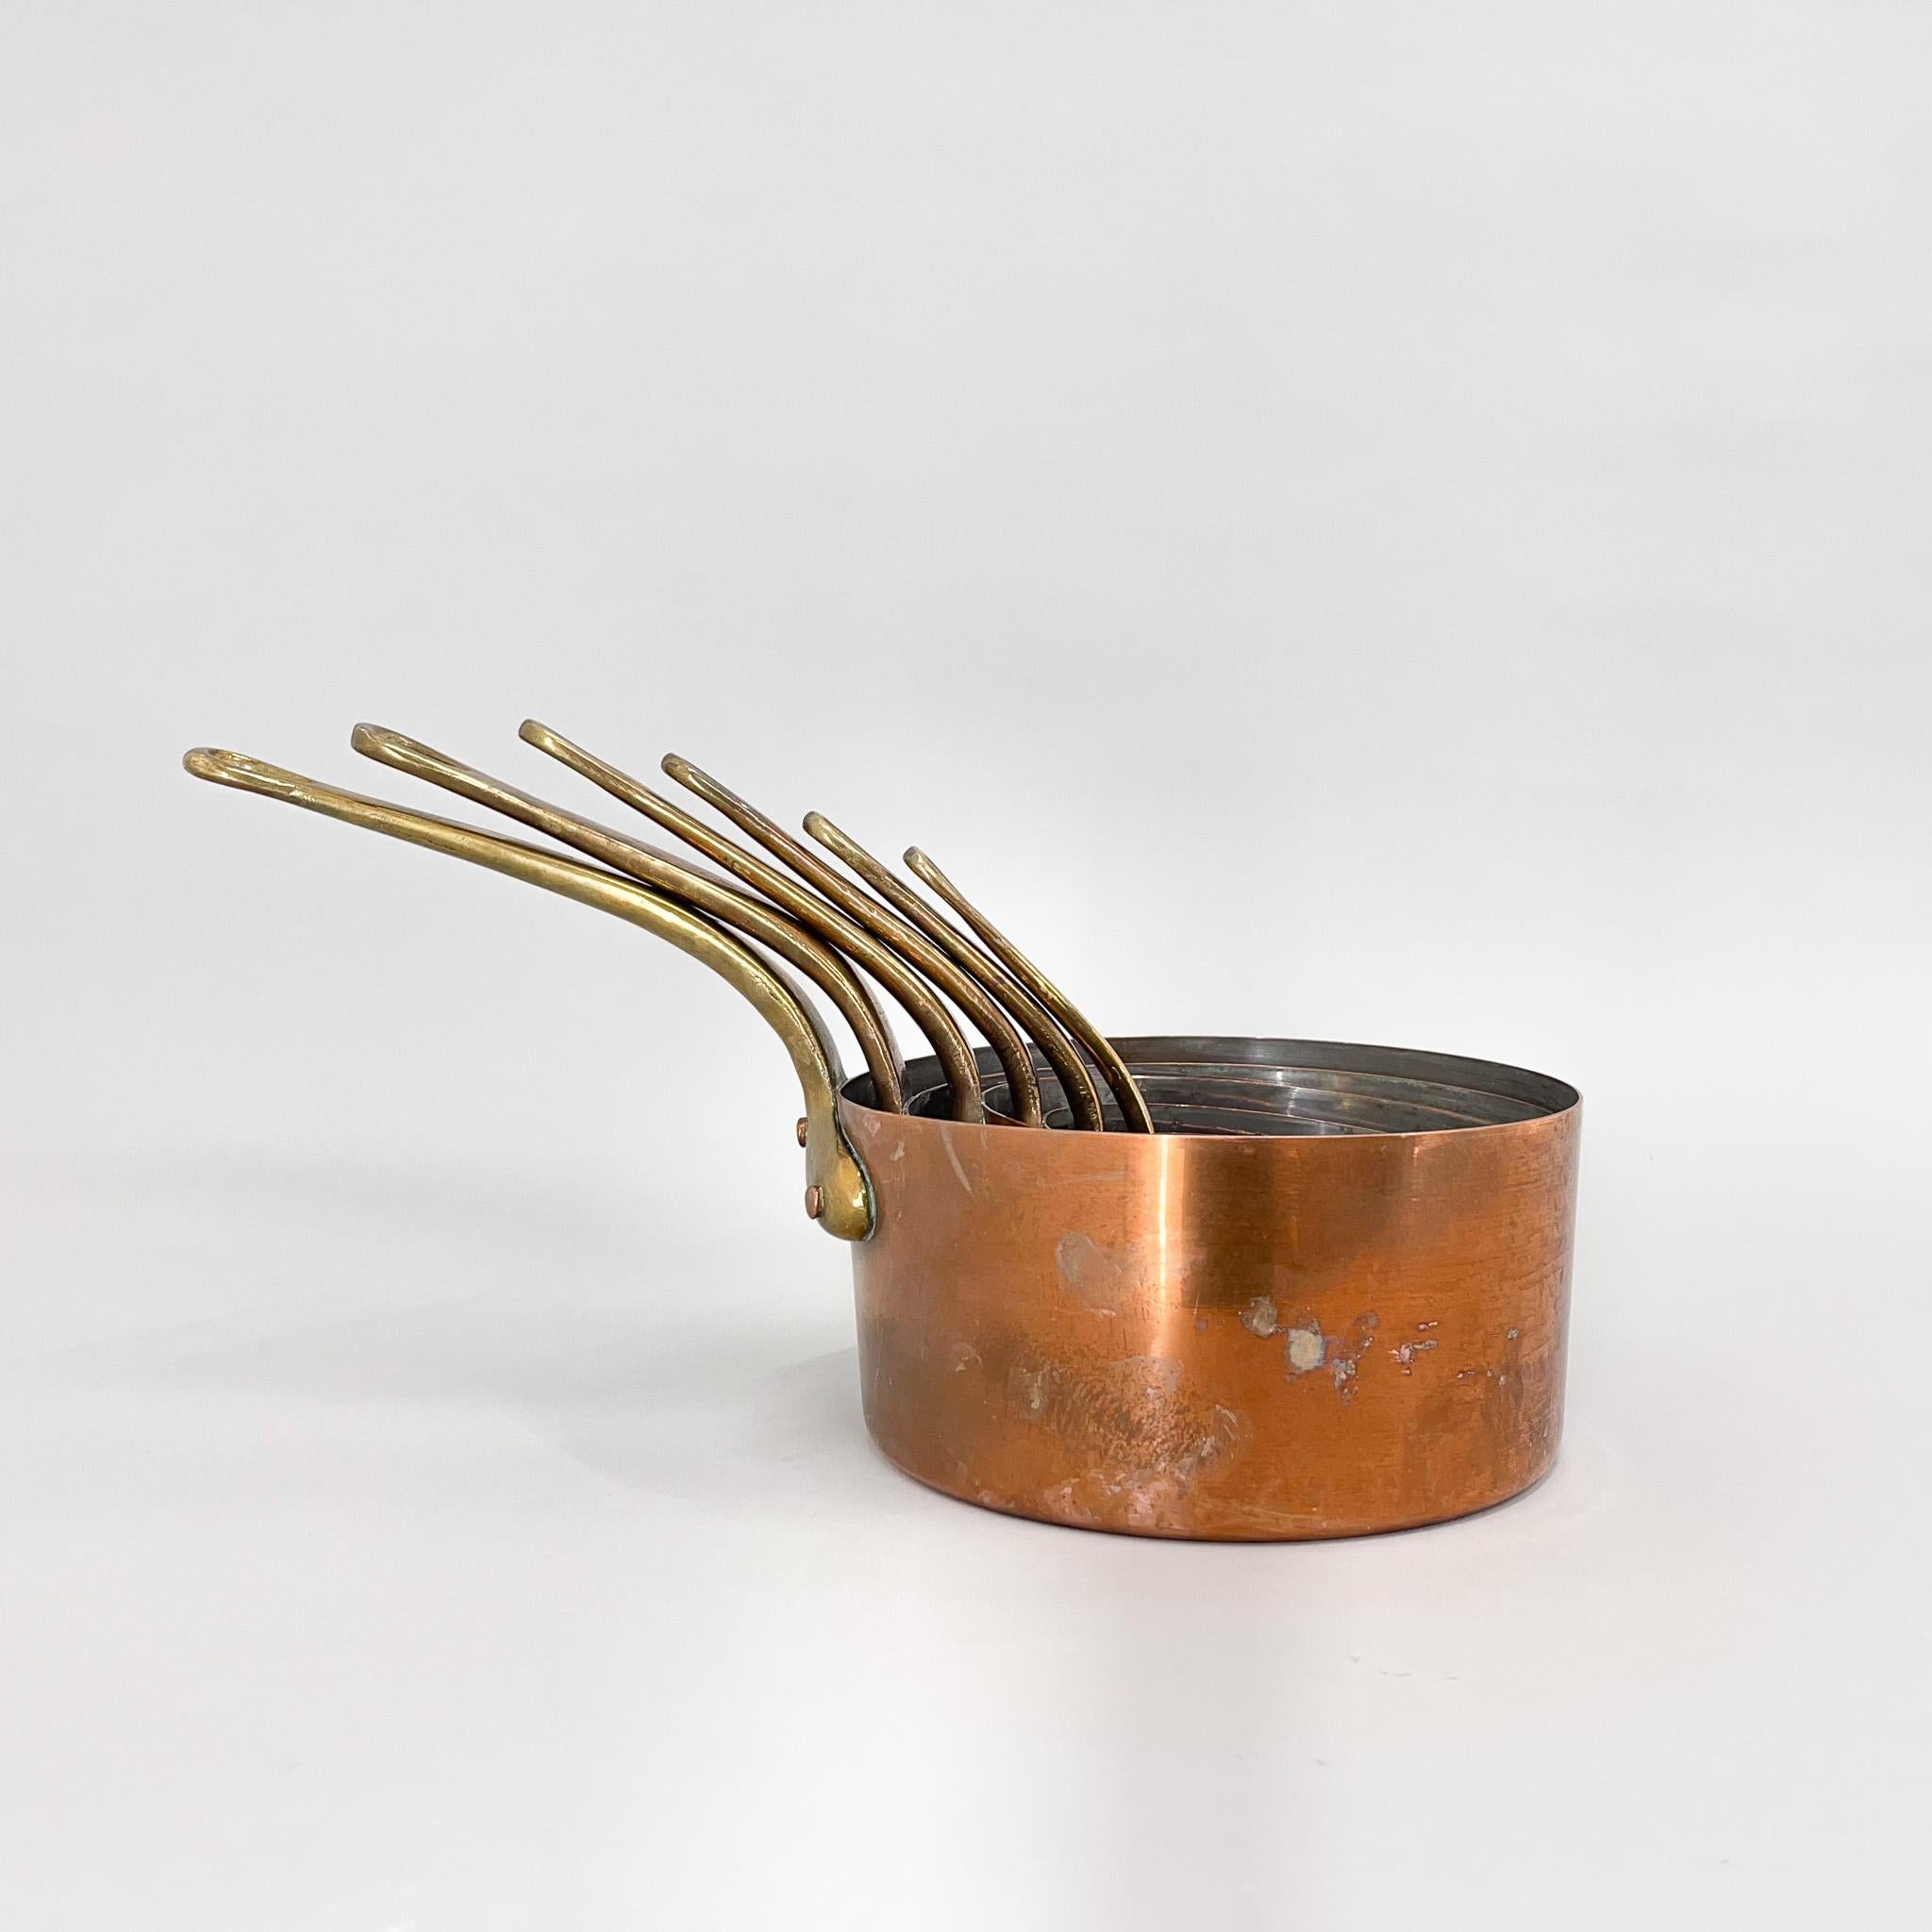 Set of six beautiful copper sauce pans. The largest is 10 cm high, is 21 cm in diameter and 39 cm long (with handle). The smallest is 5 cm high, has 10 cm in diameter and is 17 cm long (with handle).